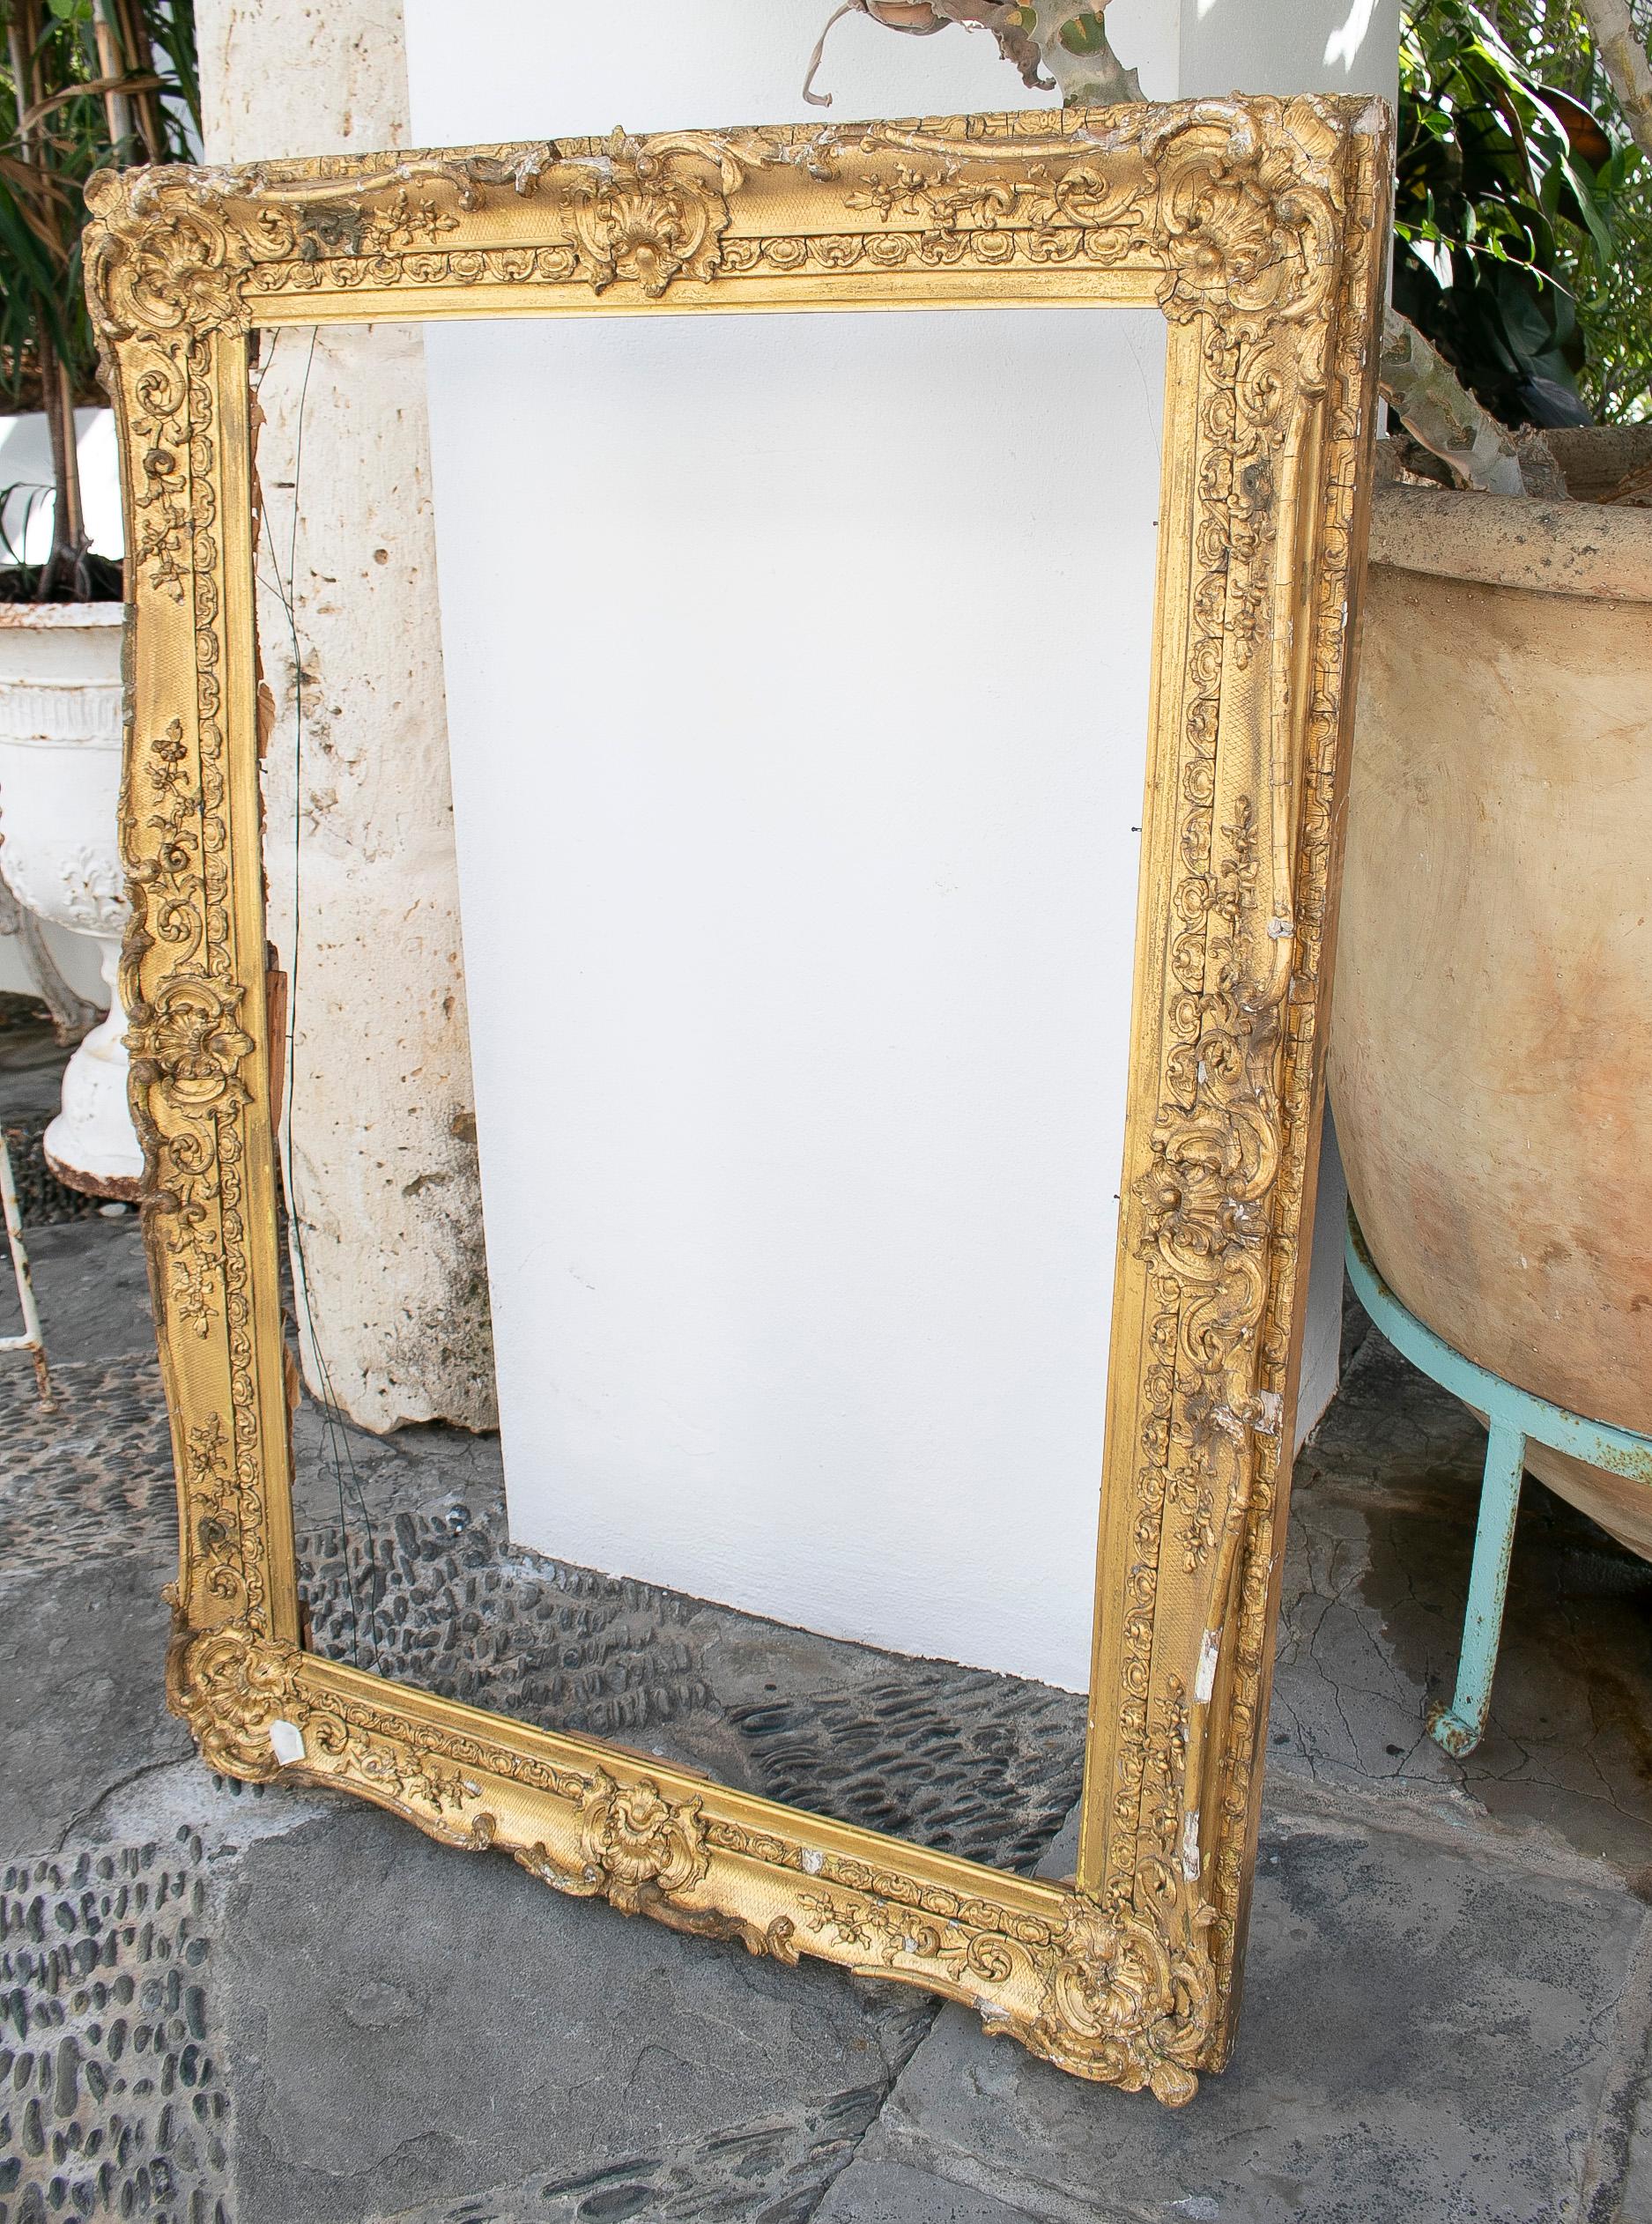 Antique 19th century French giltwood and stucco baroque frame